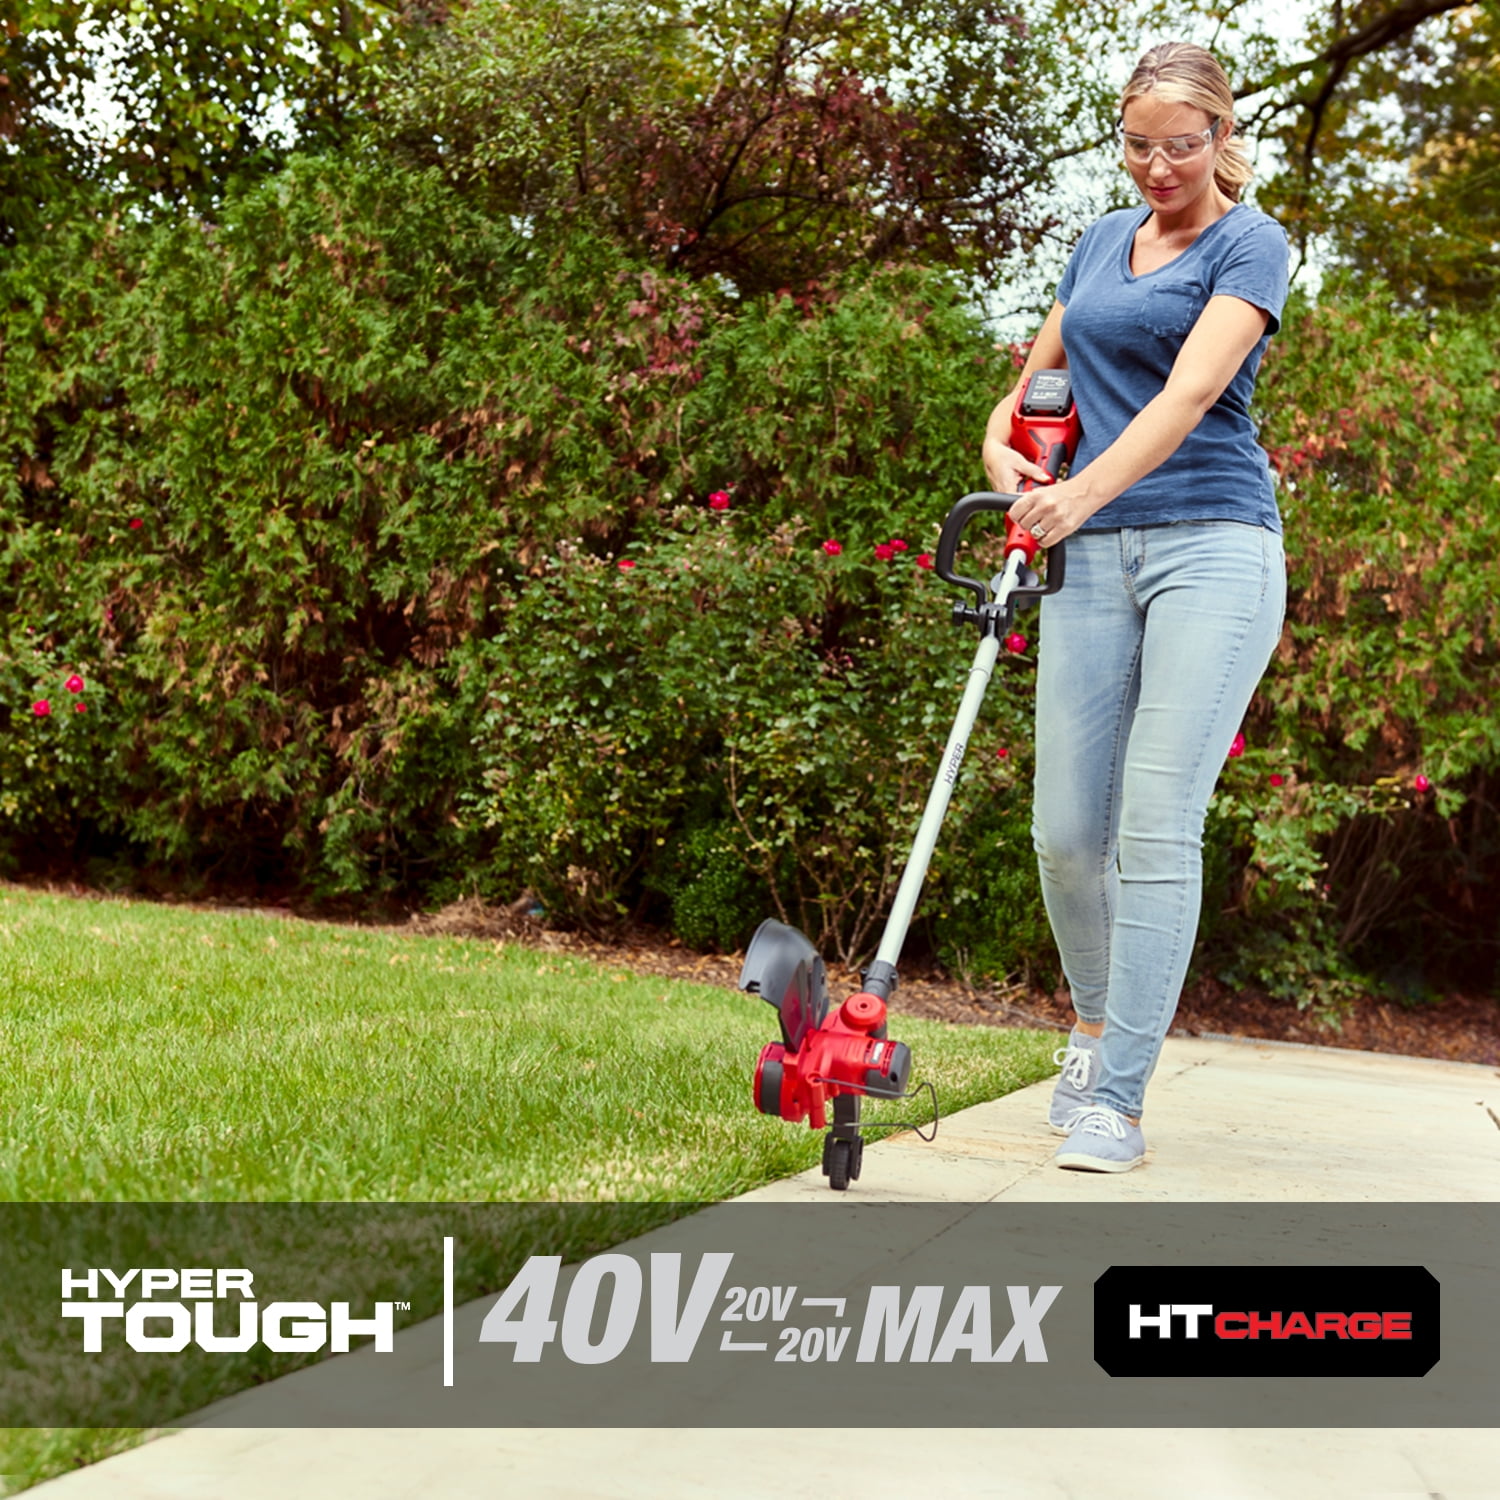 40V Max* 13 In. 2In1 Cordless String Trimmer/Edger With Powercommand Kit